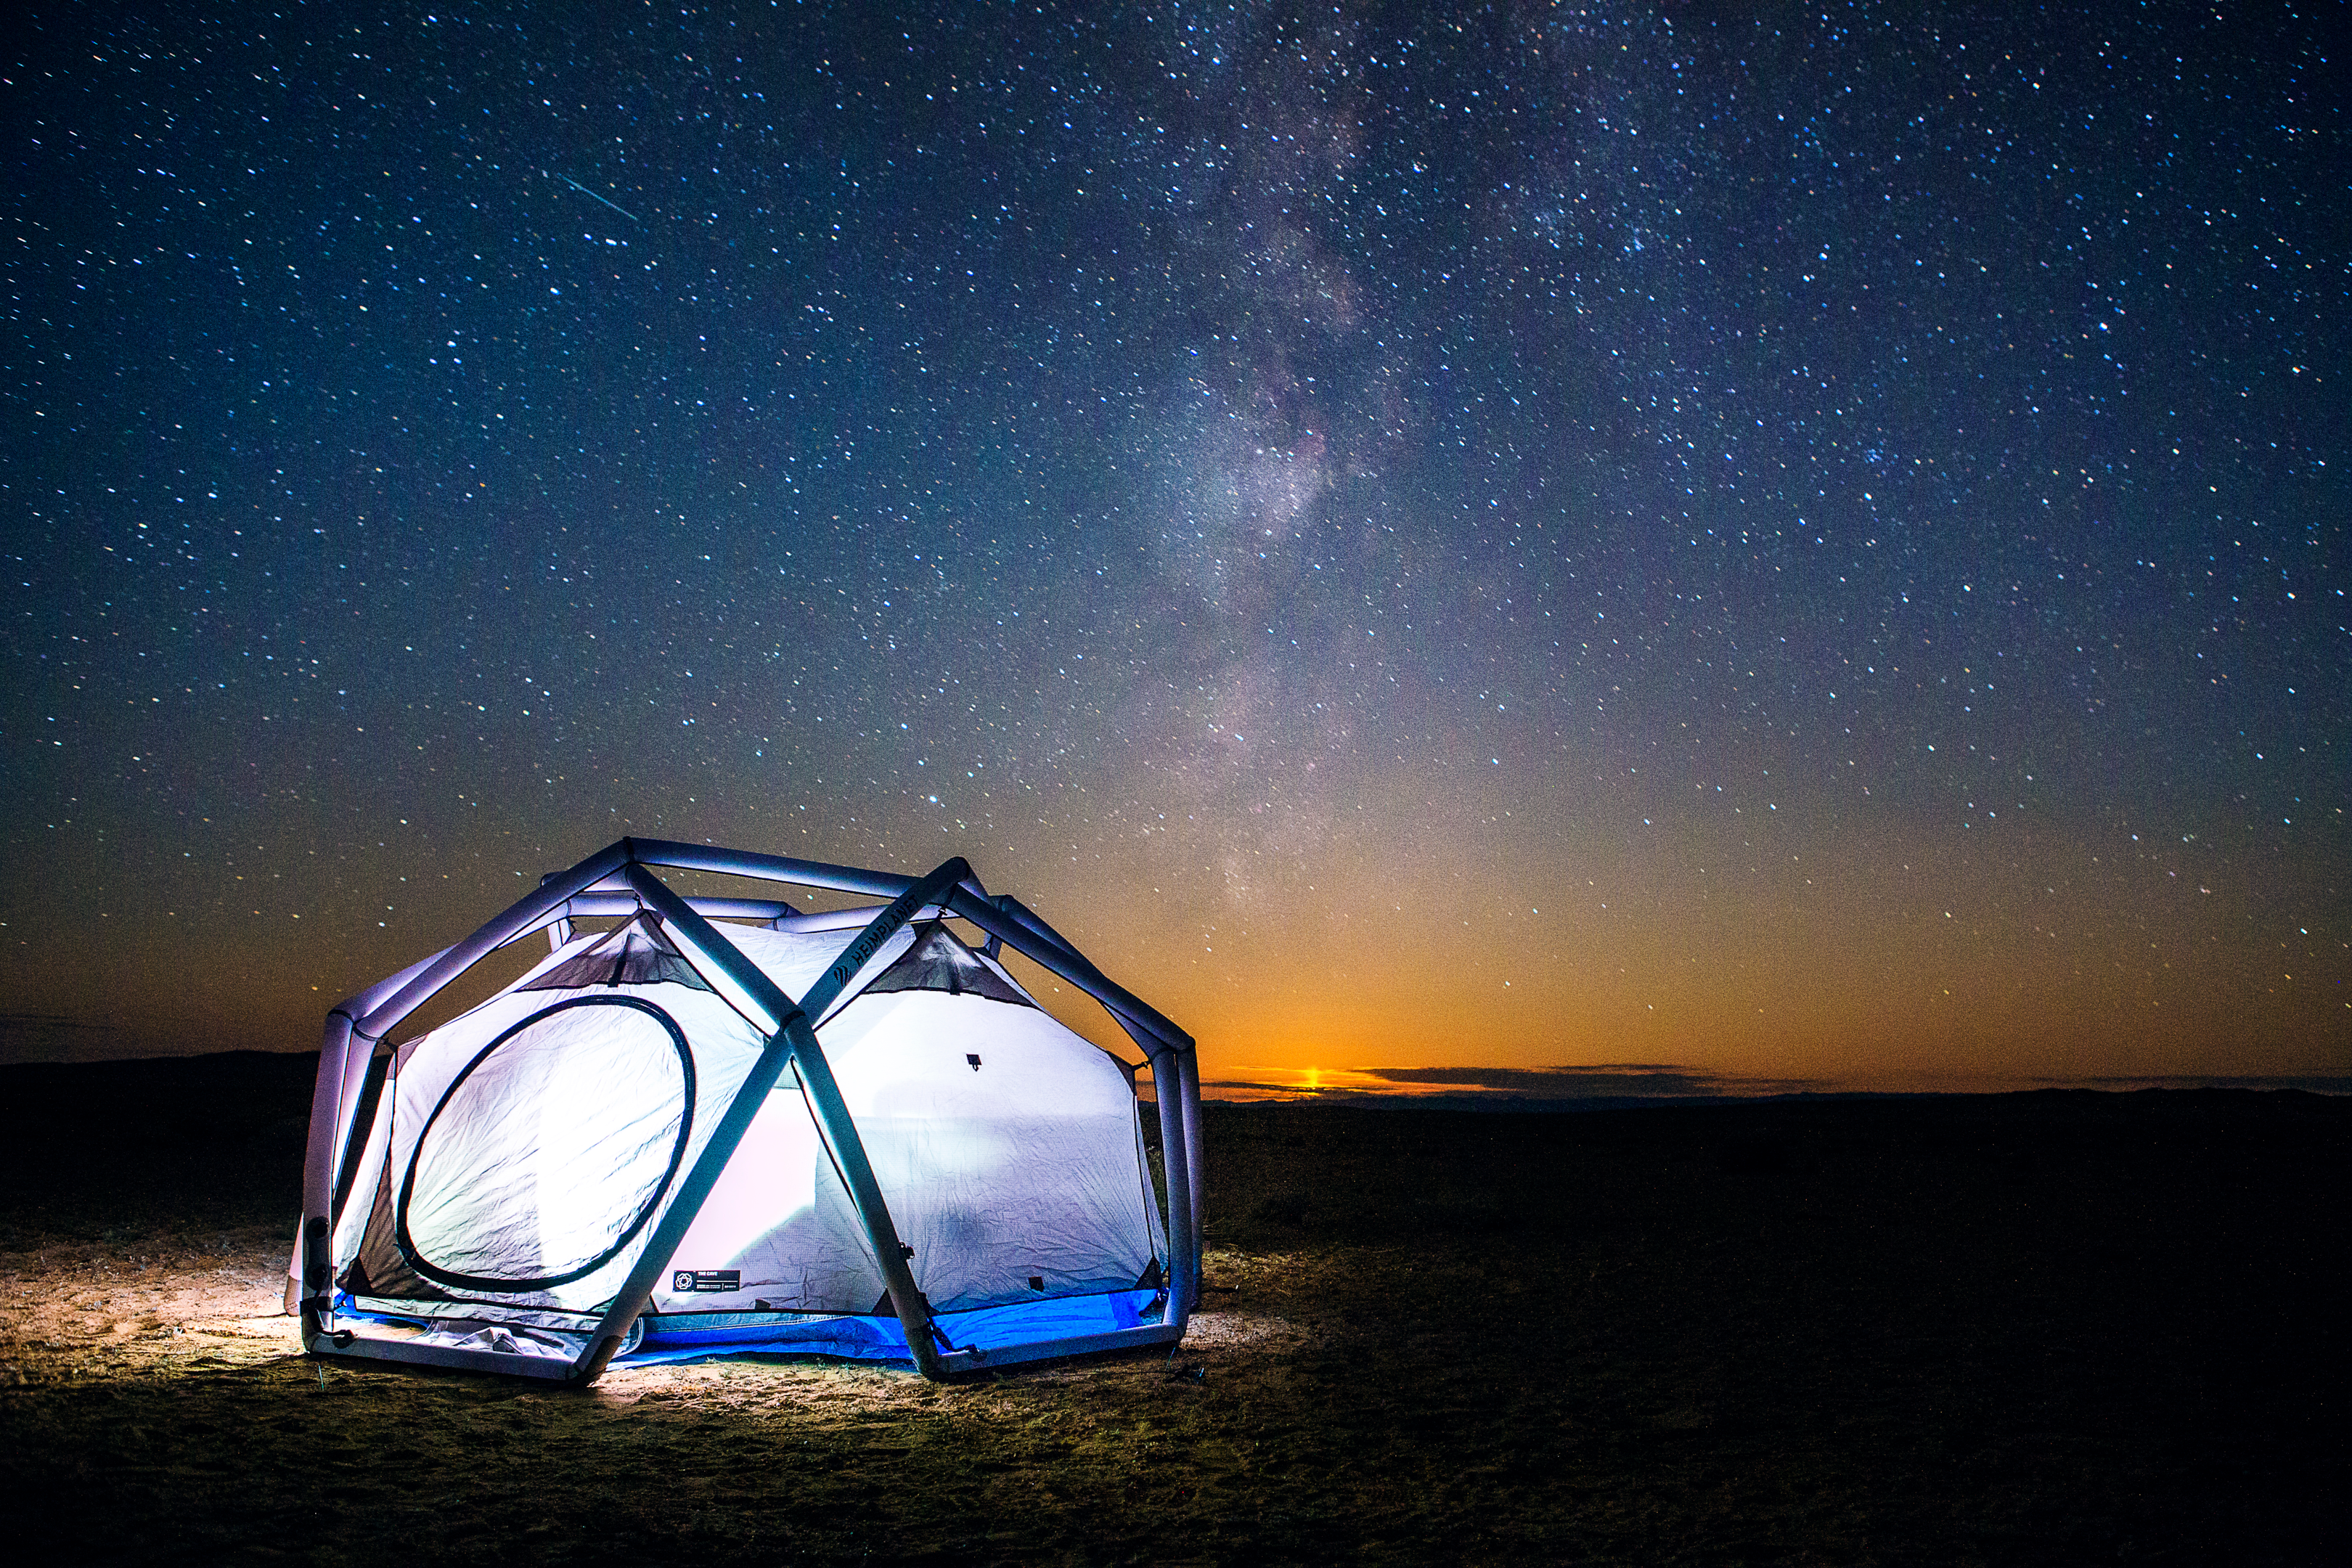 Bring or rent the right gear to enjoy an amazing night under the stars on a trip to Mongolia